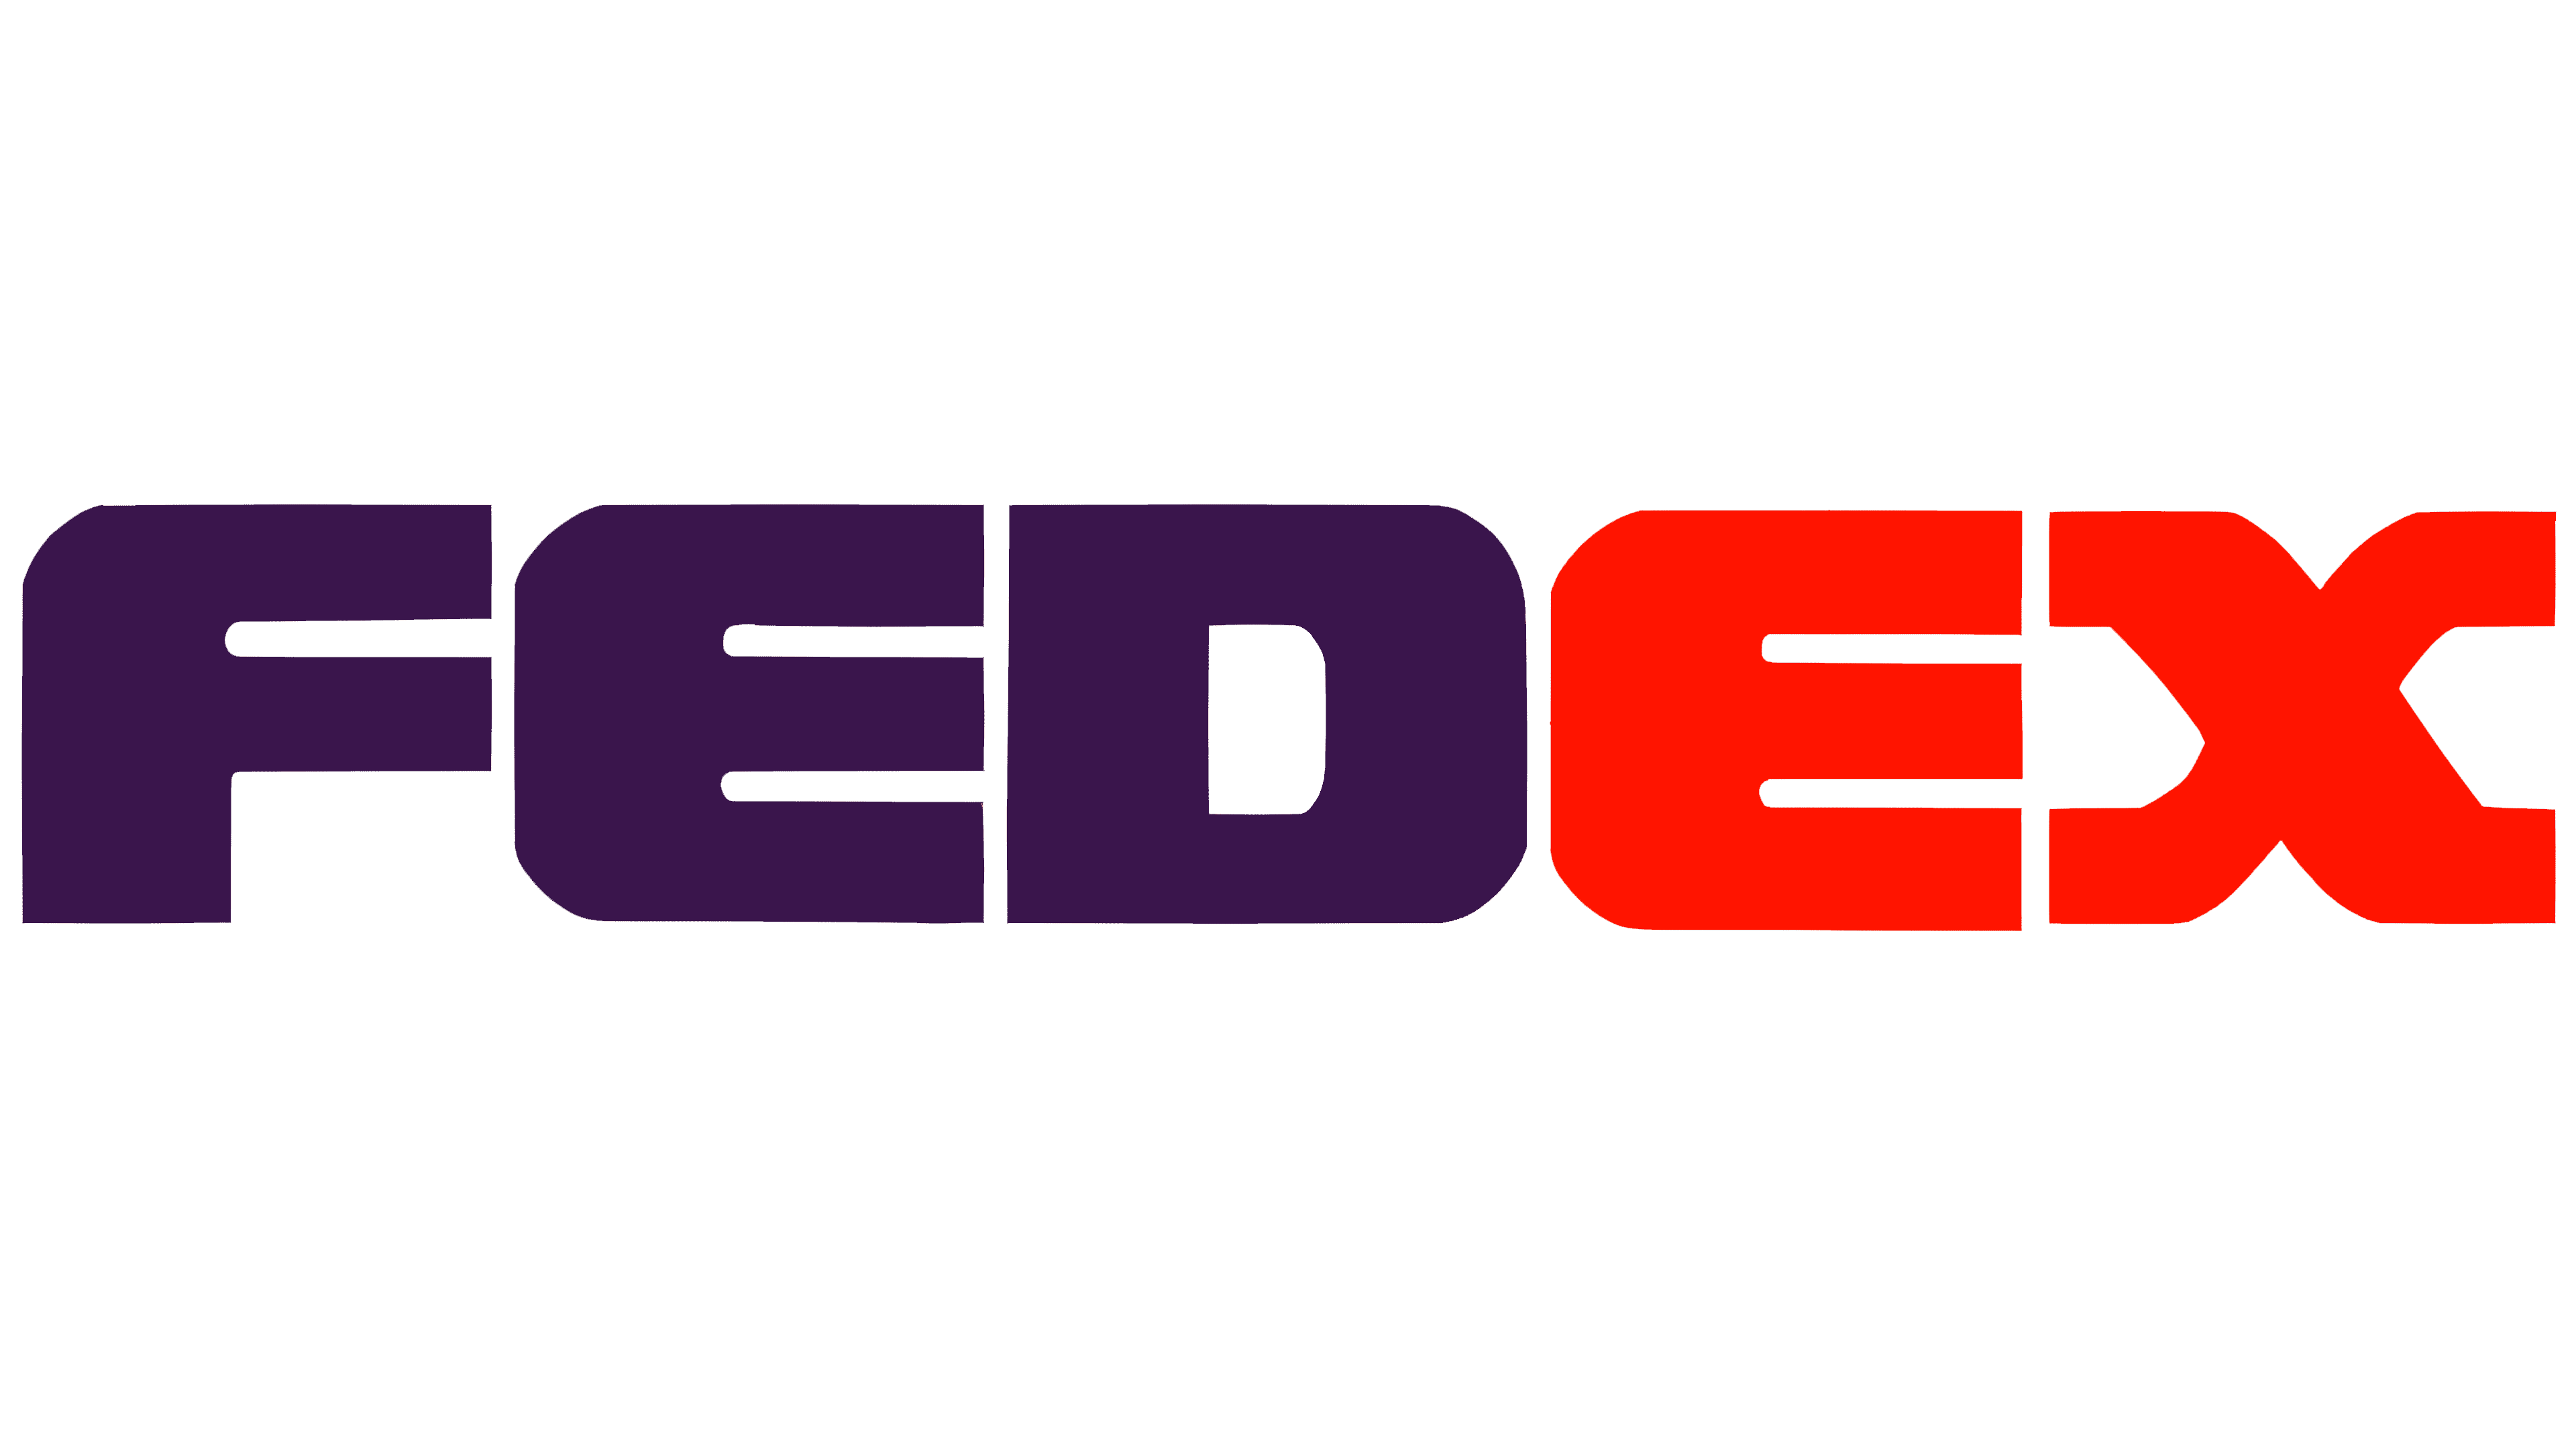 fedex brand old logo history png #42676